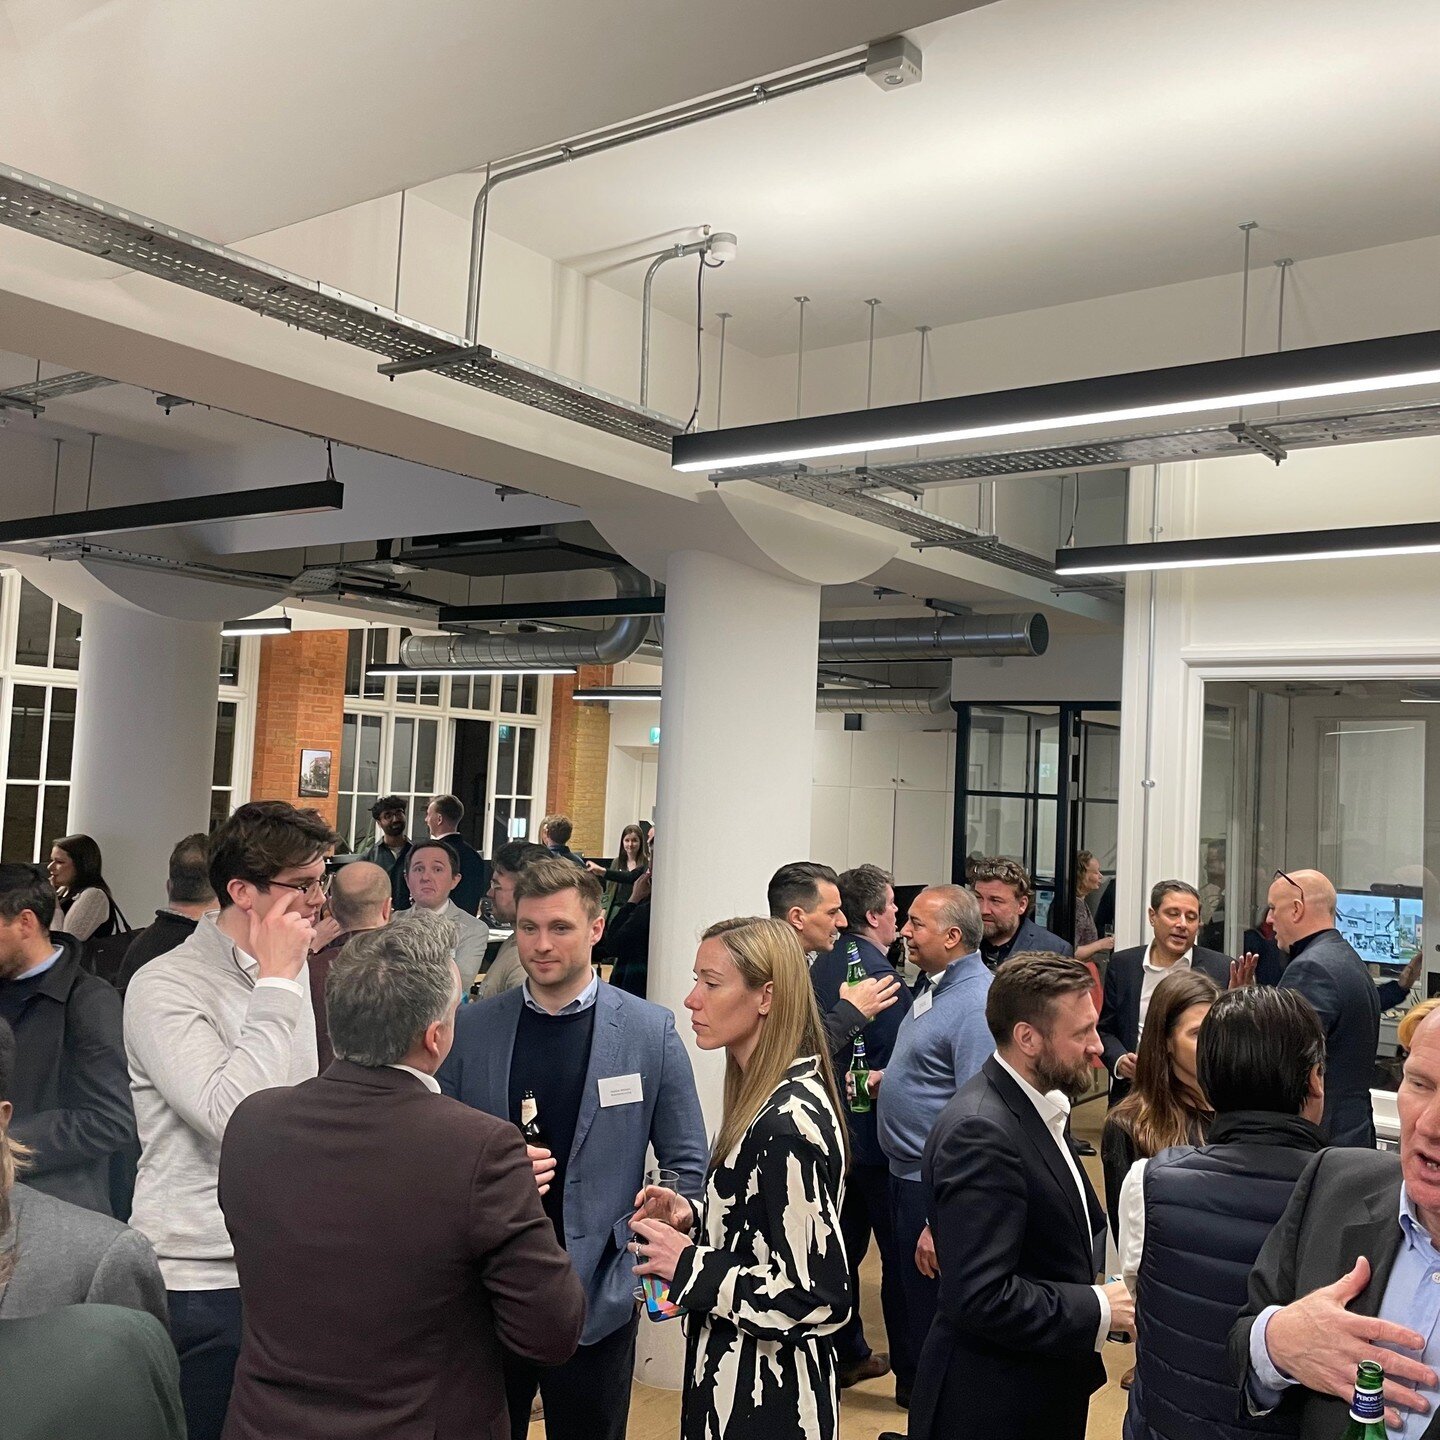 Last night we celebrated 10 years of our London Studio.

Thank you to all those that attended, it was great to see so many of you.

Building Photo Credit: Natalya Tonkins of @diamond_build_group 
 
#party #celebration #anniversary #teamevent #thankyo